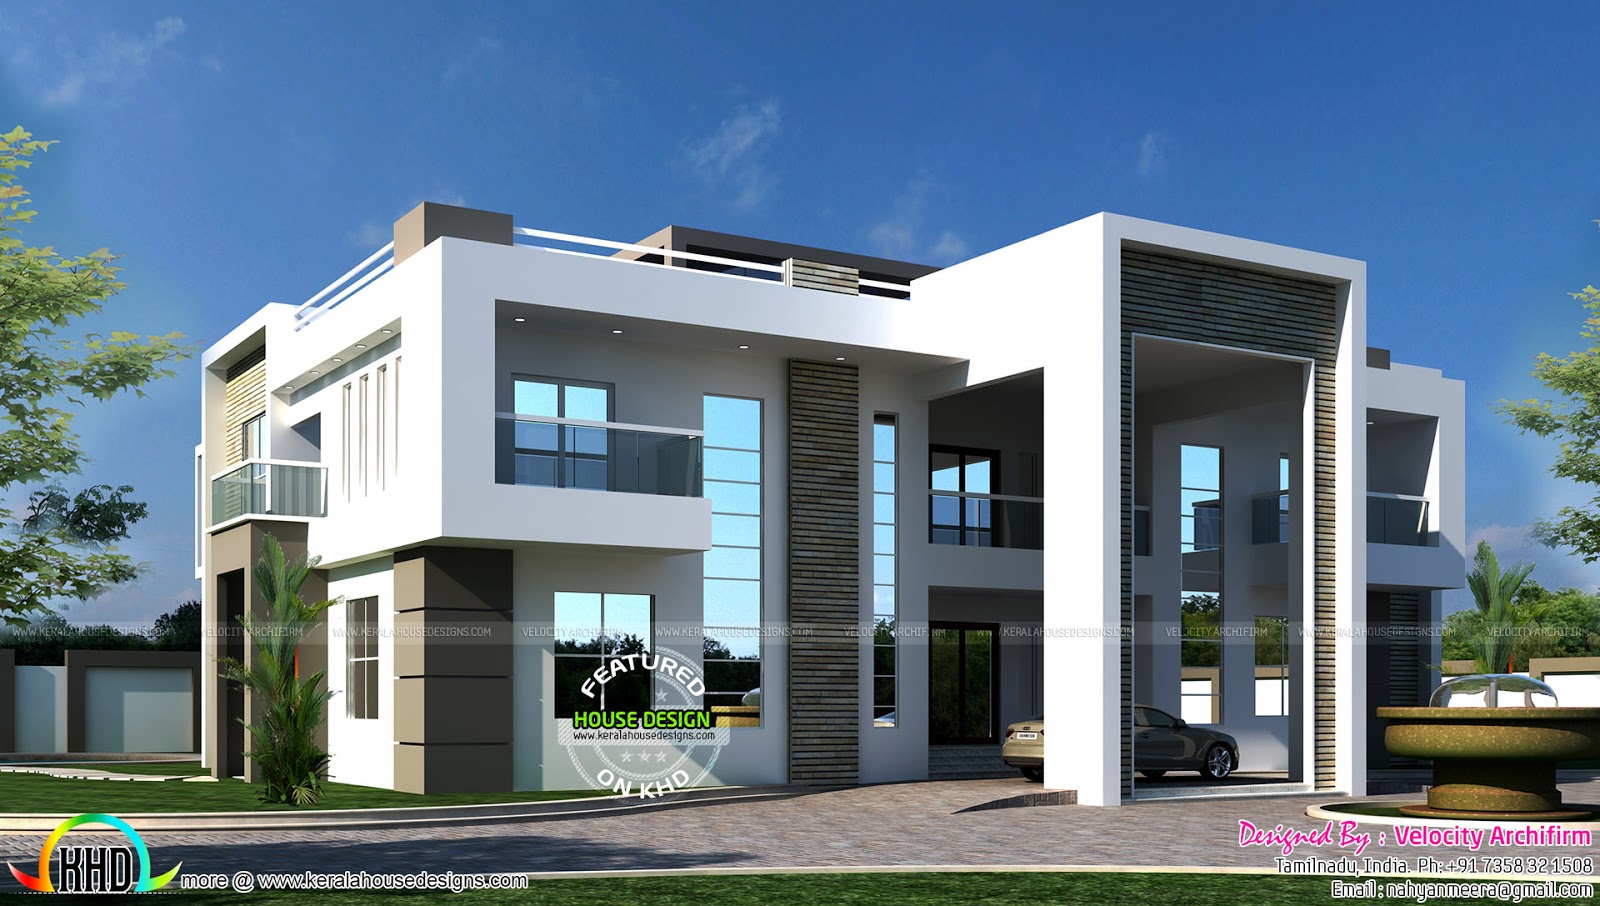 November 2015 - Kerala home design and floor plans - Contemporary home design by Velocity Archifirm